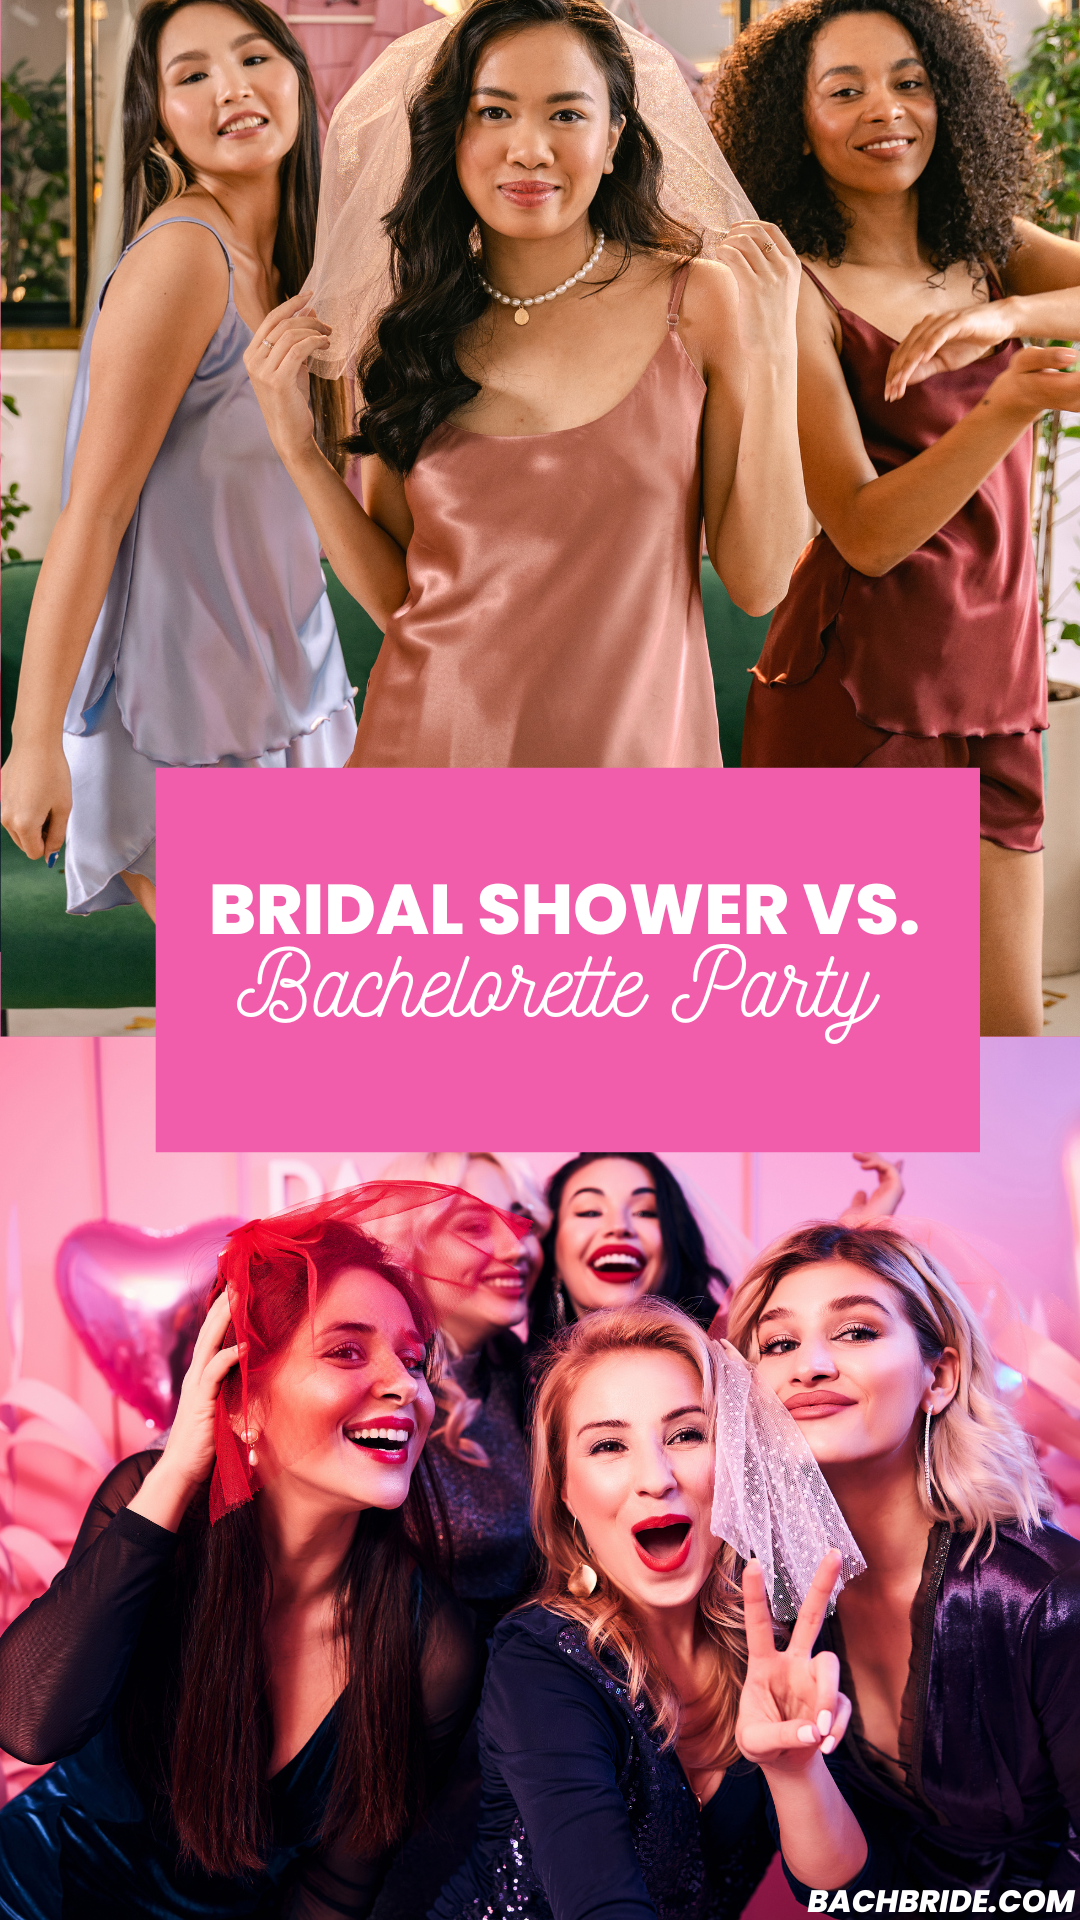 Bridal Shower vs Bachelorette Party: What's the Difference? - Bach